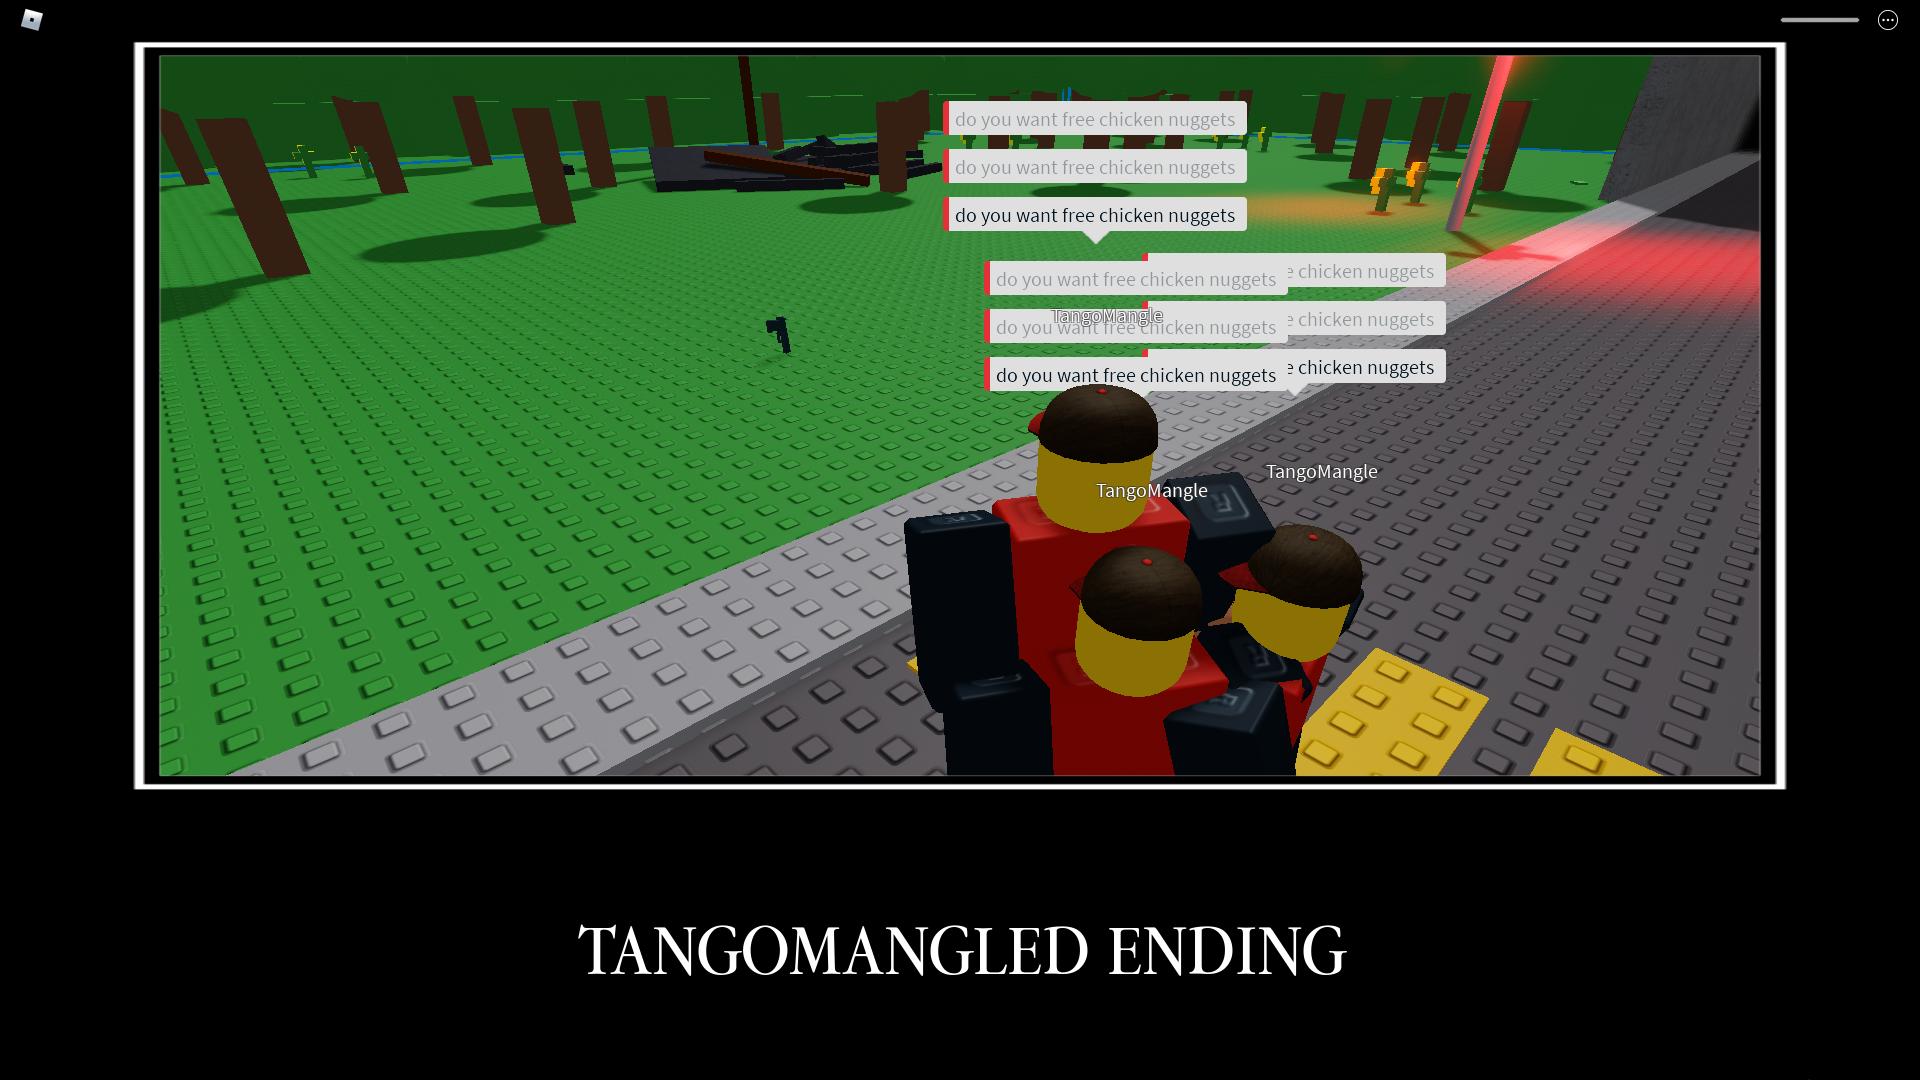 Backrooms Ending, ROBLOX NPCs are becoming smart Wiki